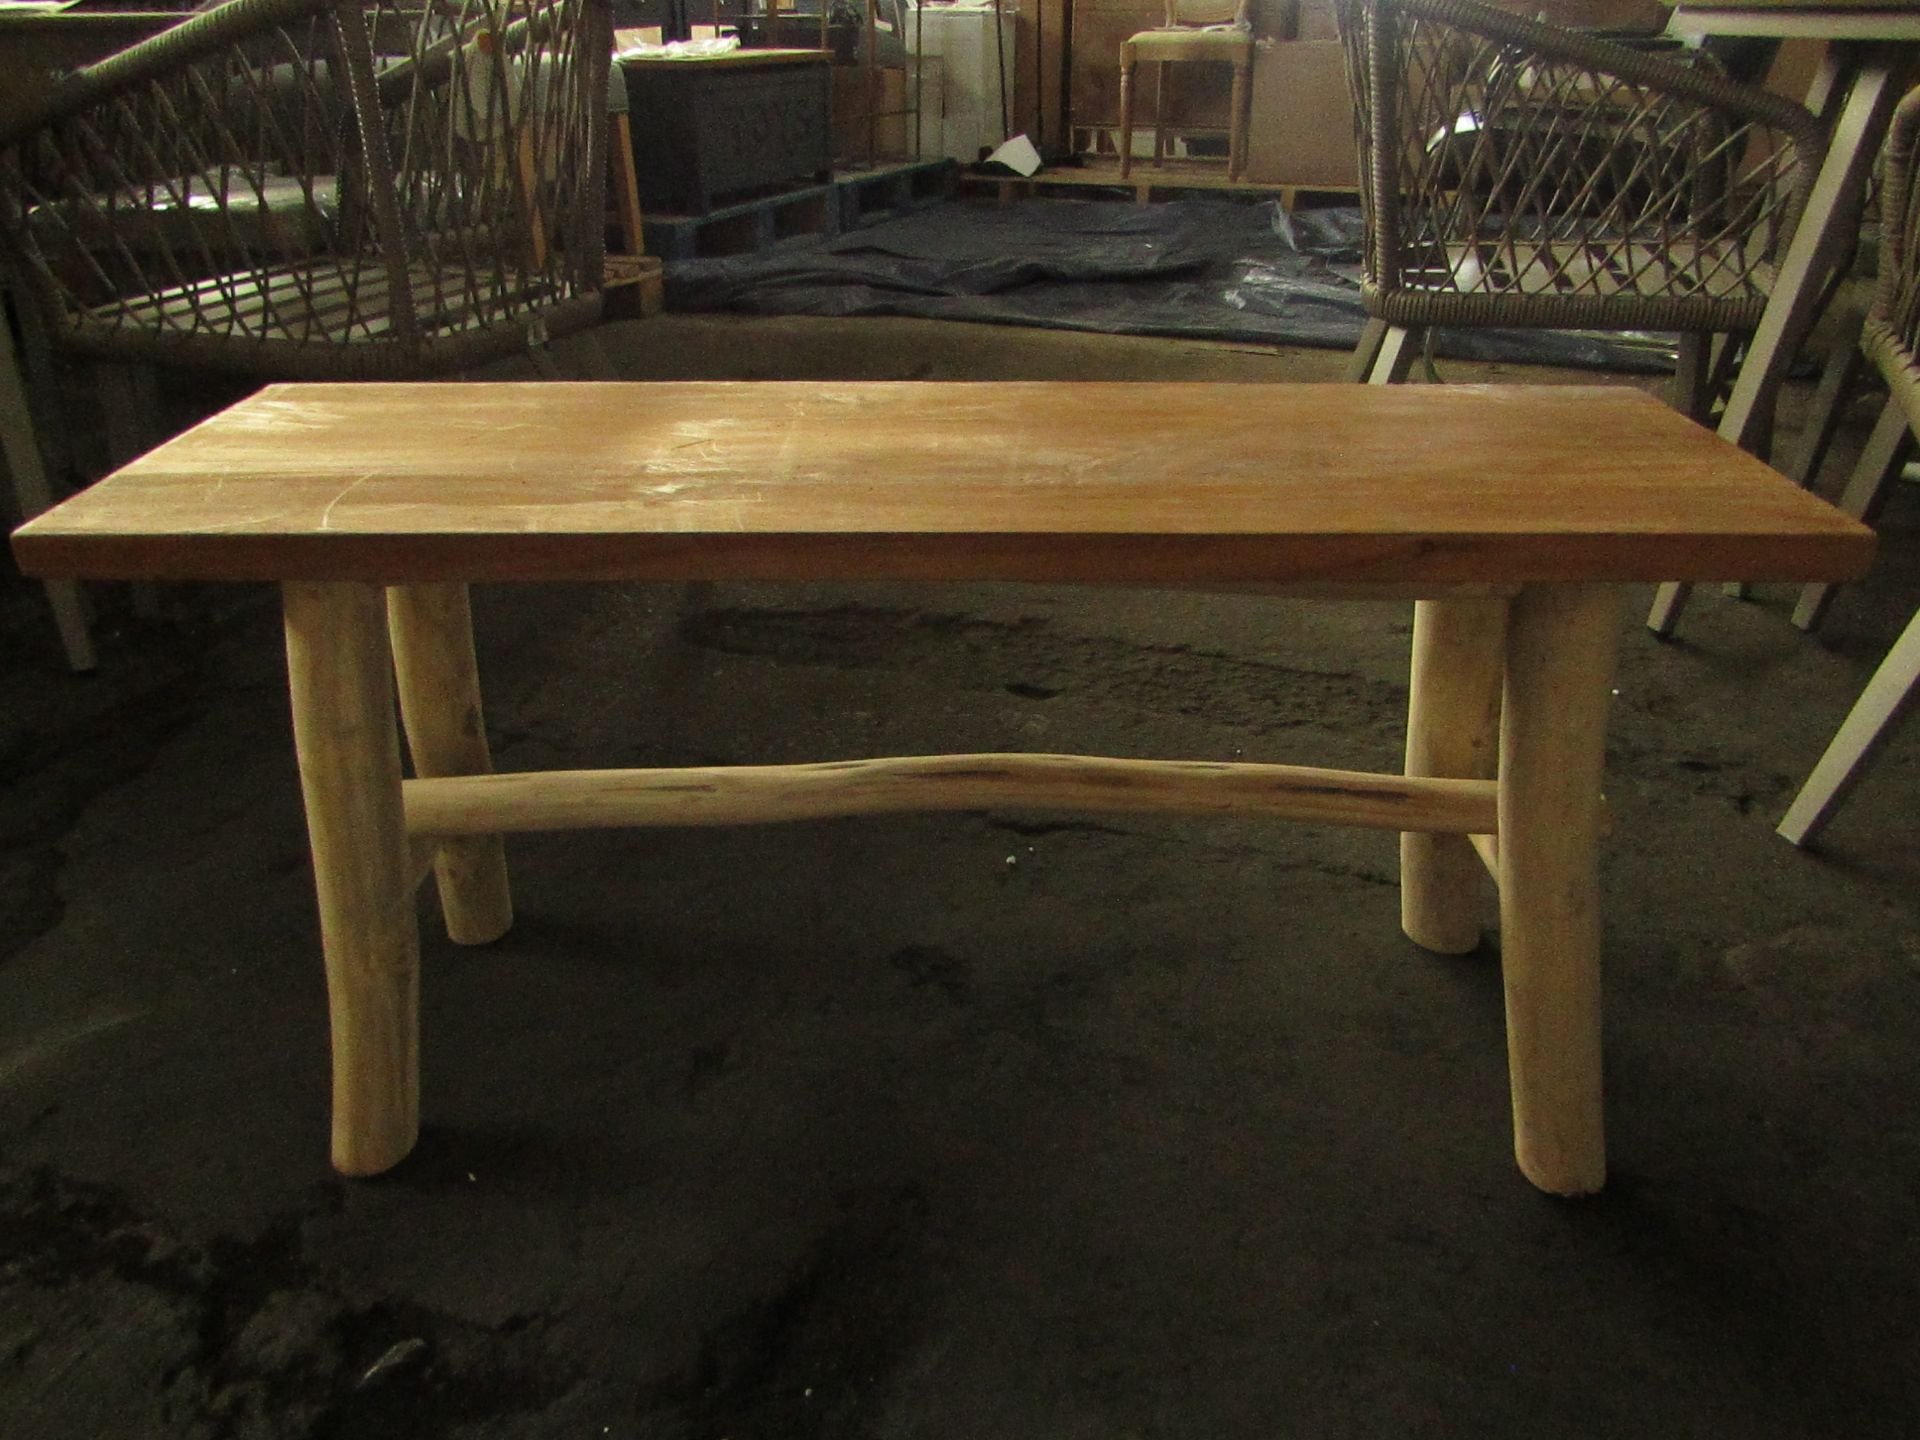 Cox & Cox Indoor Outdoor Rustic Teak Bench RRP Â£175.00 - The items in this lot are thought to be in